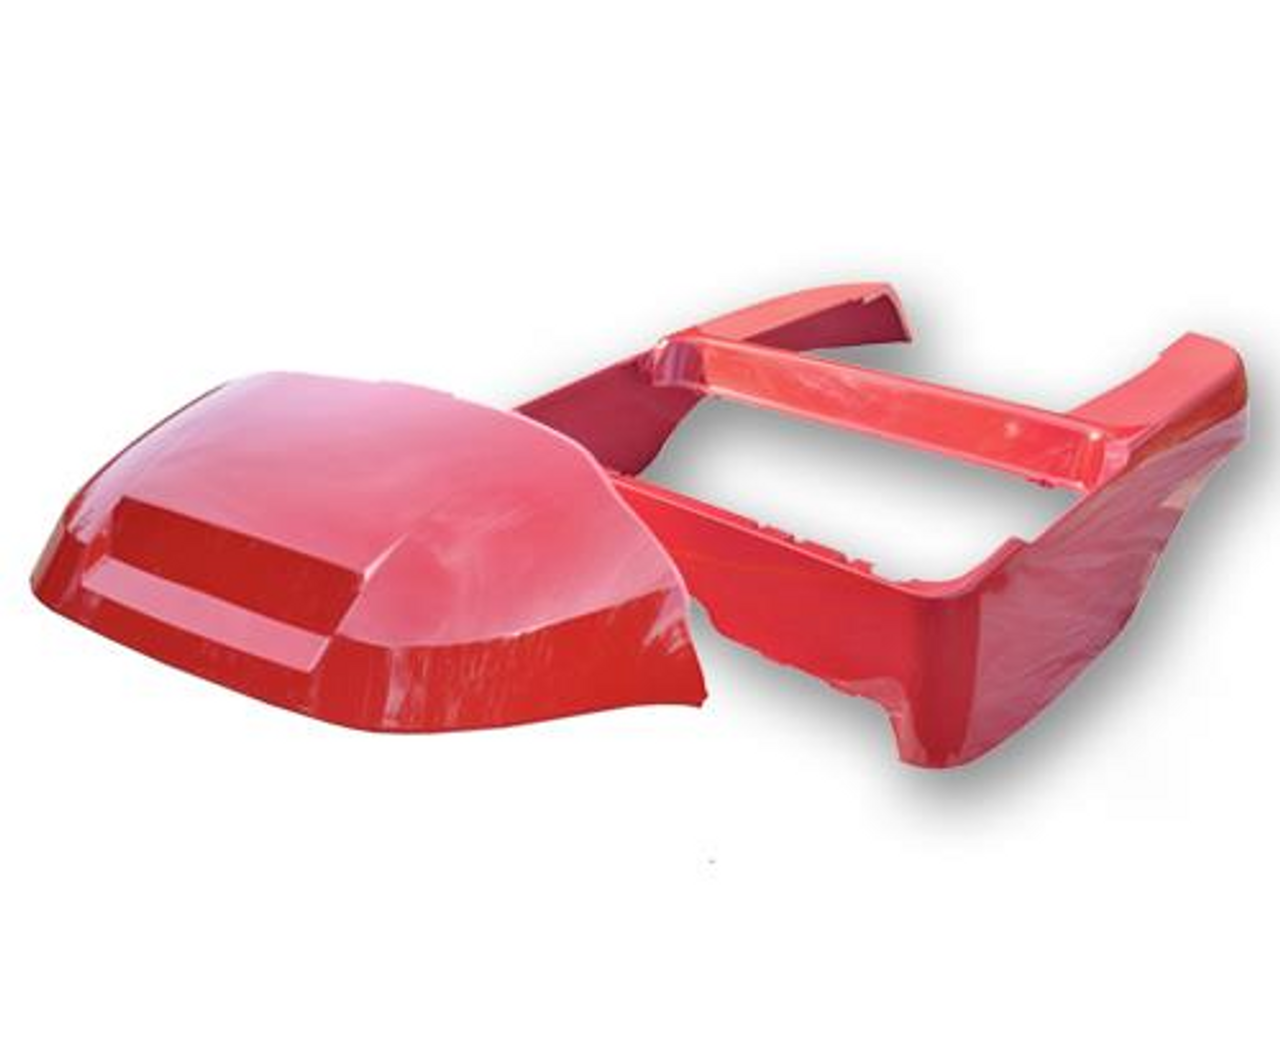 Rear Body and Front Cowl MadJax Red OEM Club Car Precedent 2004-Up Golf Cart, 05-A04